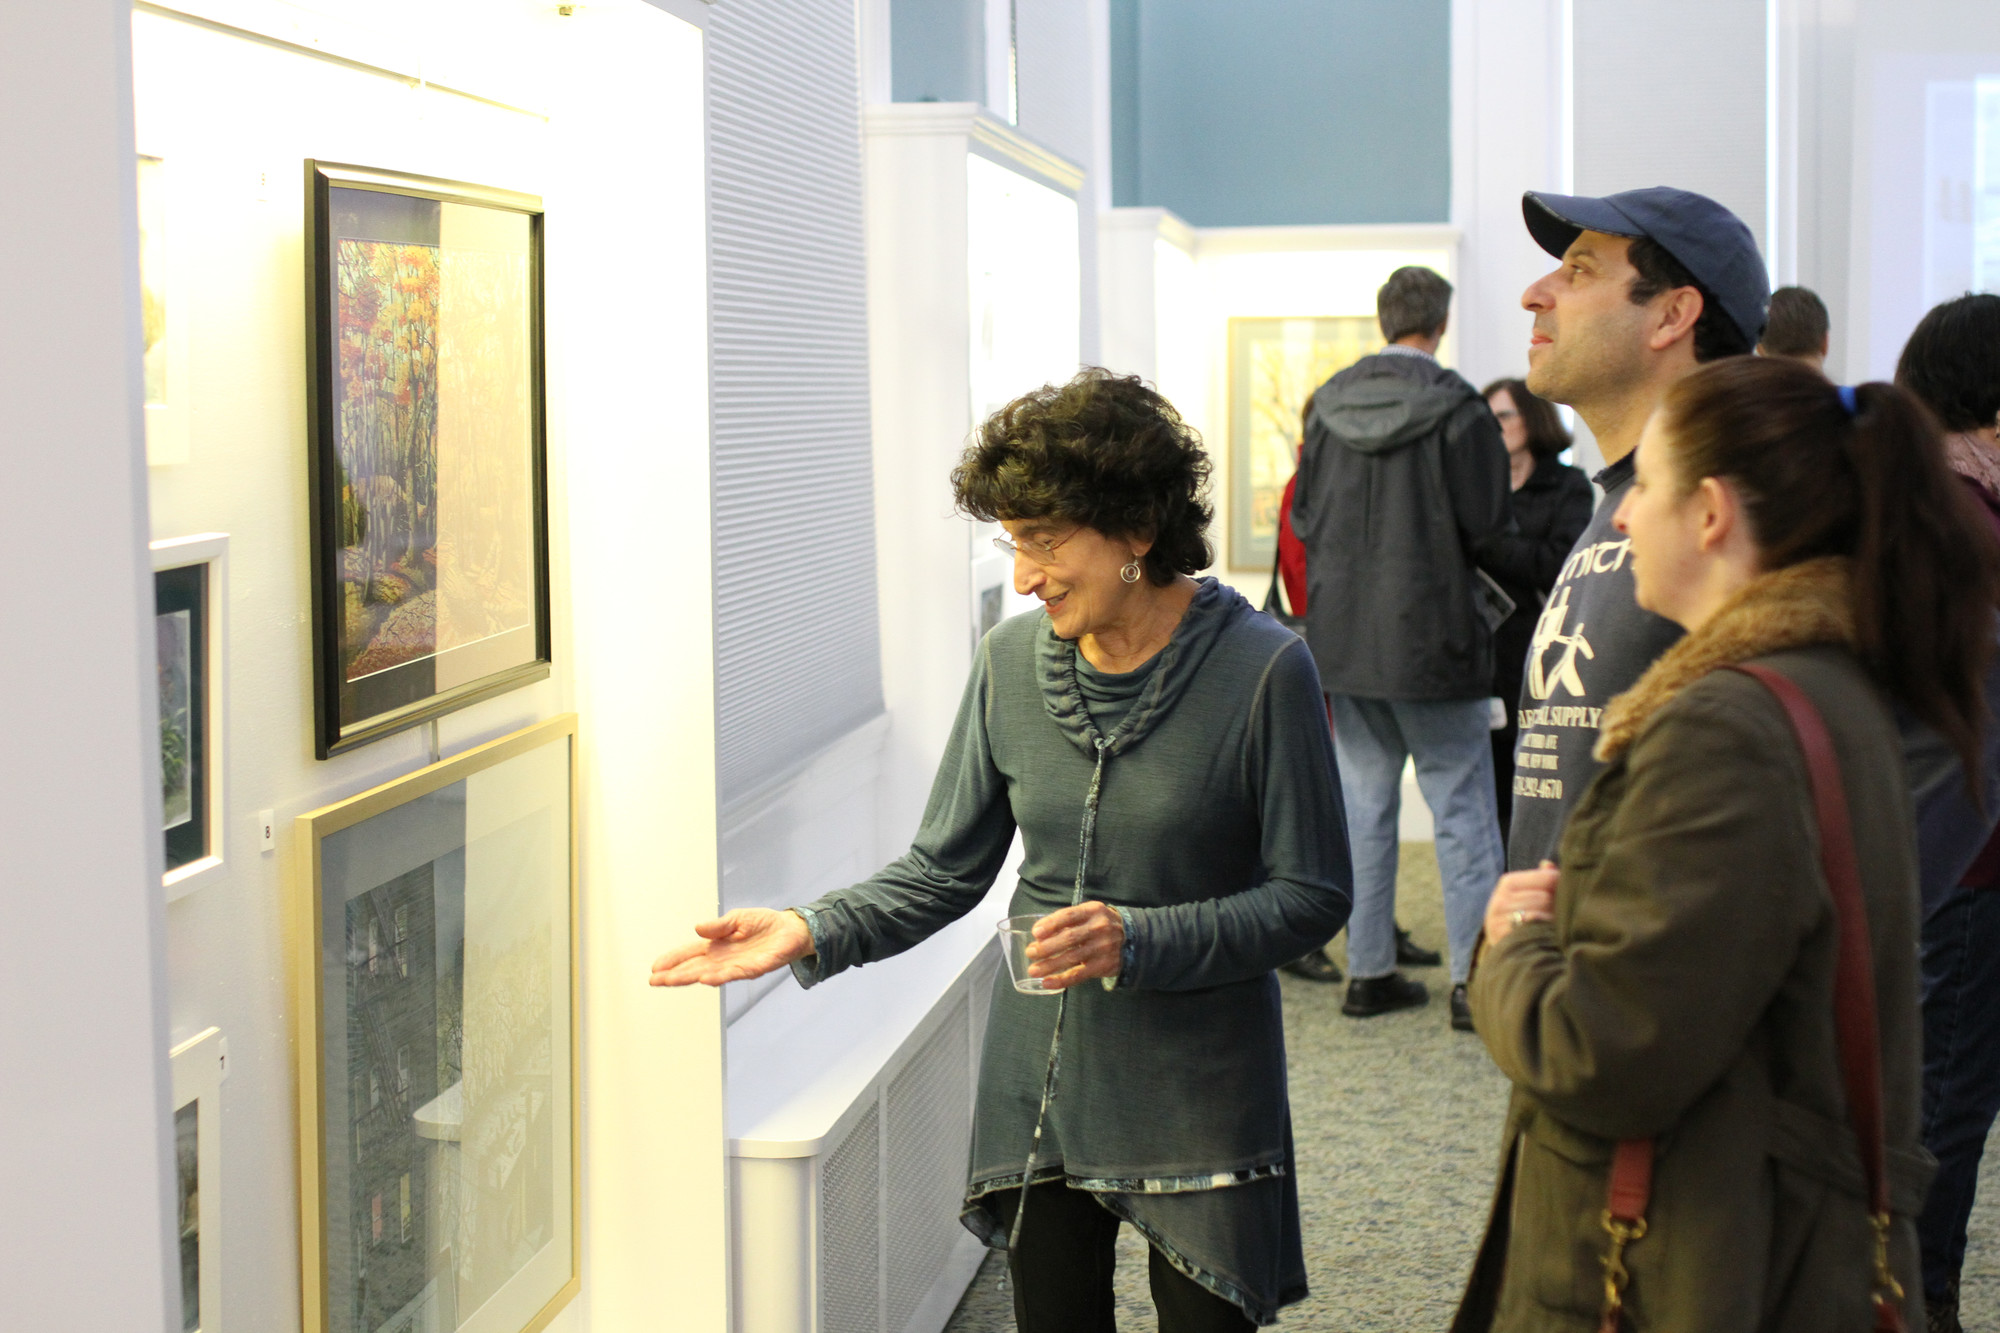 Patti Guglielmo, who worked with Bishop at East Rockaway High School, shows her son, Michael, and daughter-in-law, Corey, Bishop's artwork.